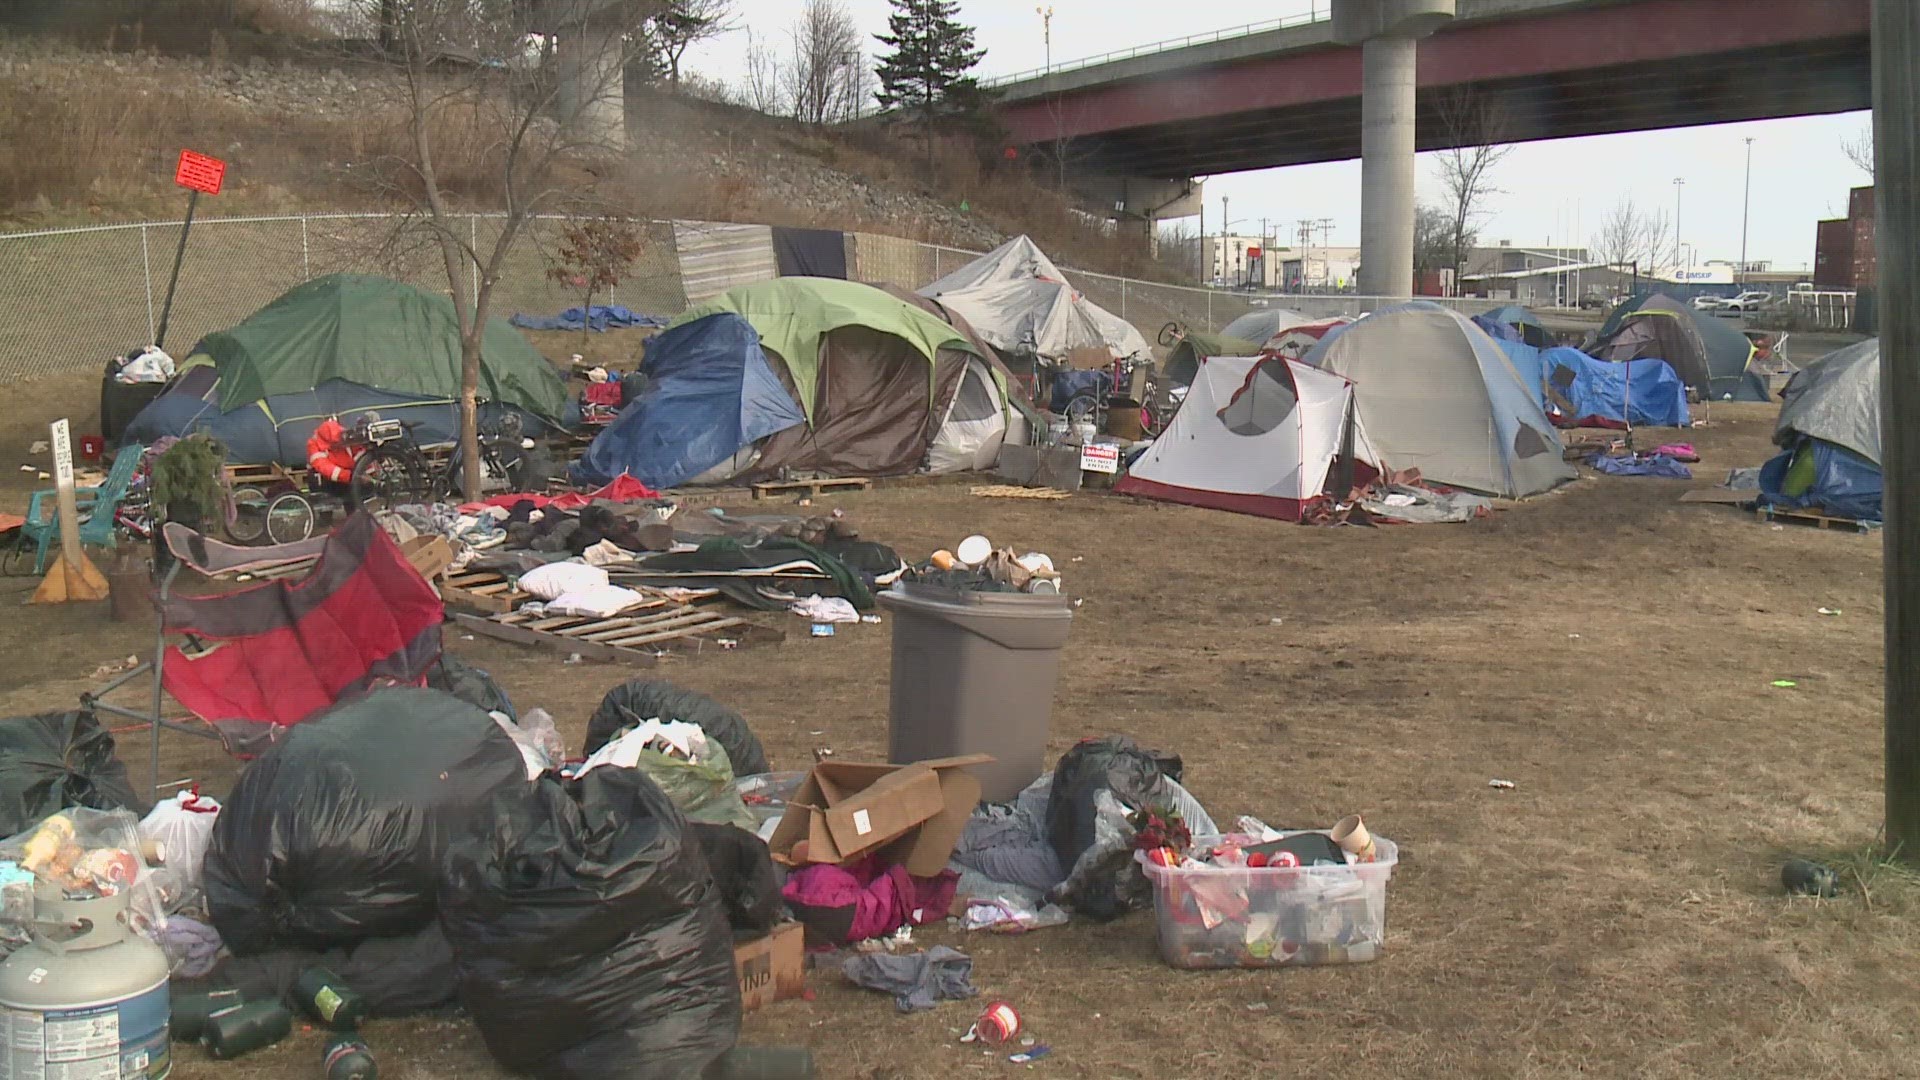 The decision came early Tuesday morning after councilors voted 7-2 Monday night in disapproval of sweeps. The move comes after a storm destroyed tents and clothes.